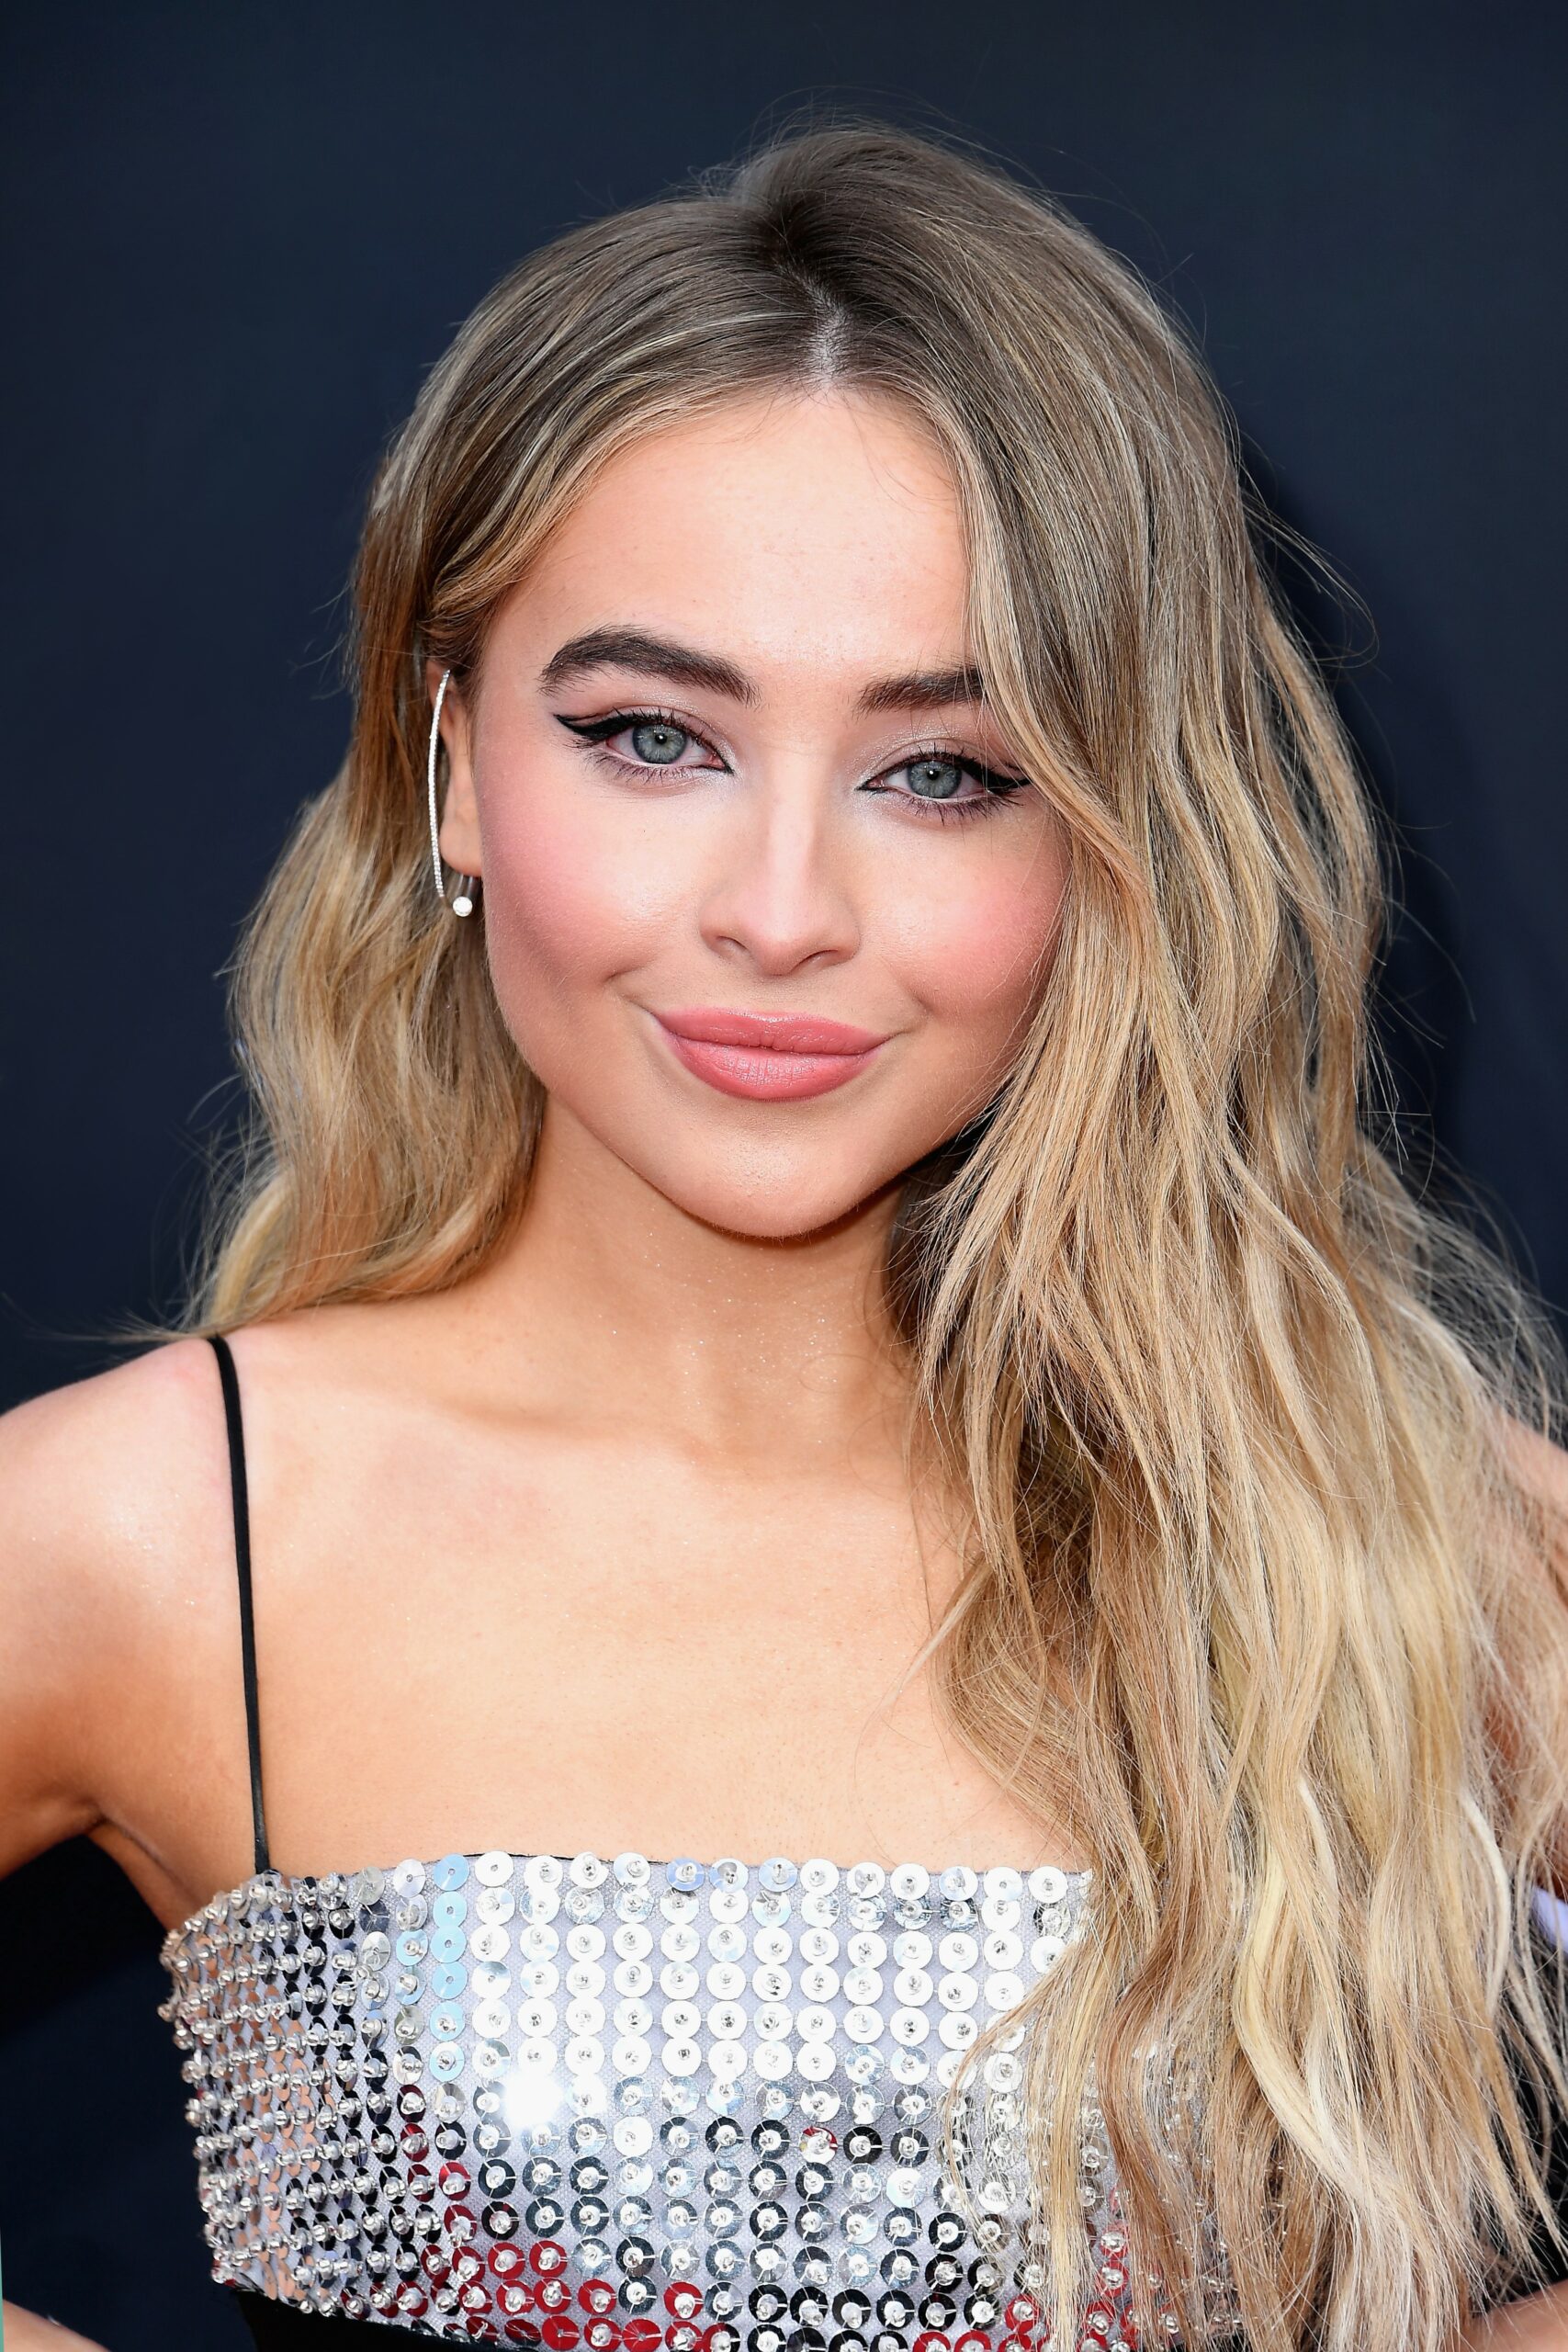 The Journey Of Sabrina Carpenter: Who Is The Rising Star?